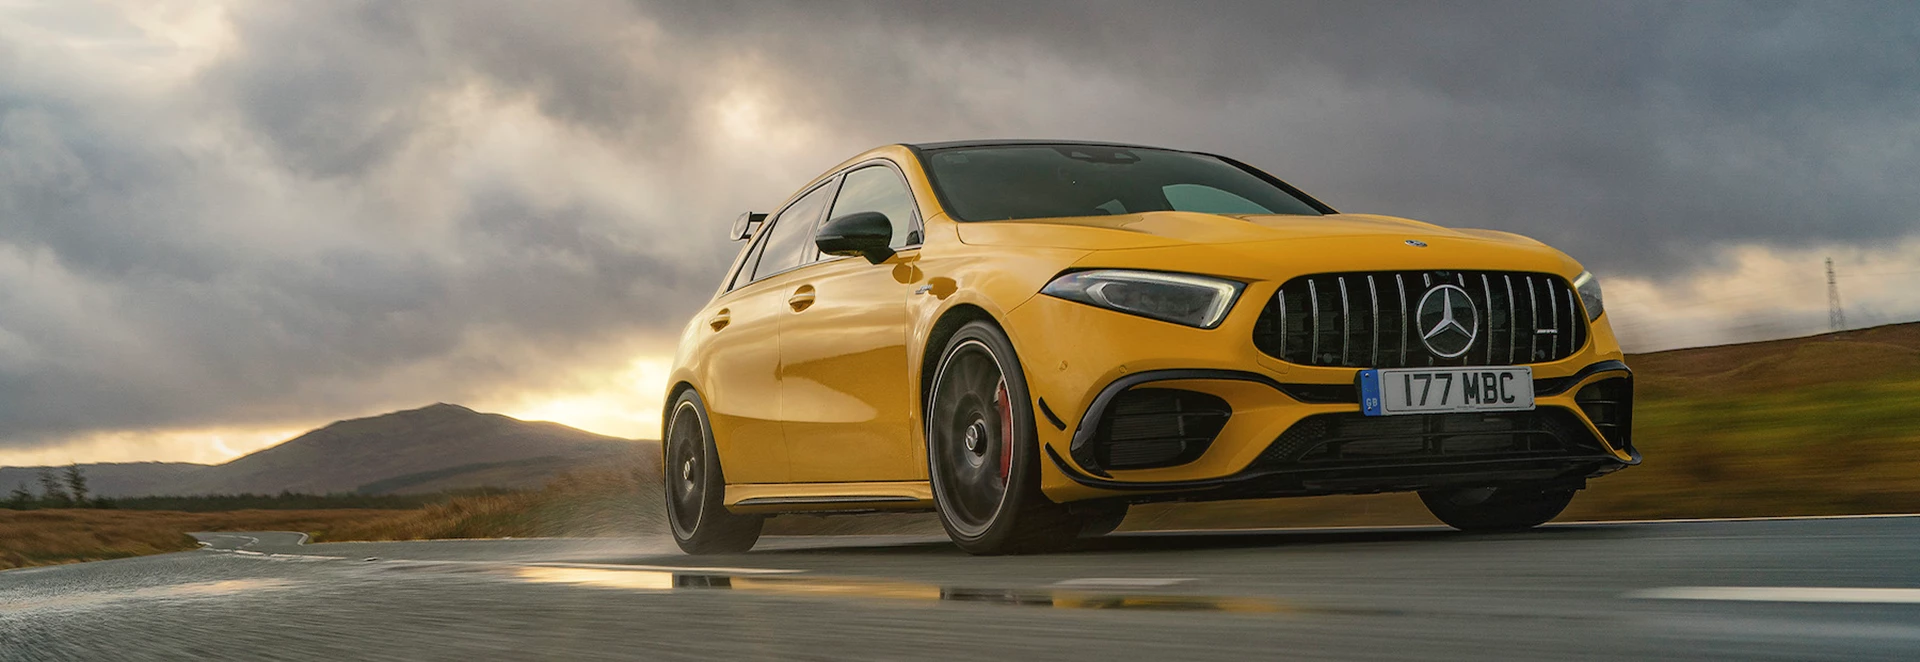 Here’s what you need to know about the Mercedes-AMG A45 S 